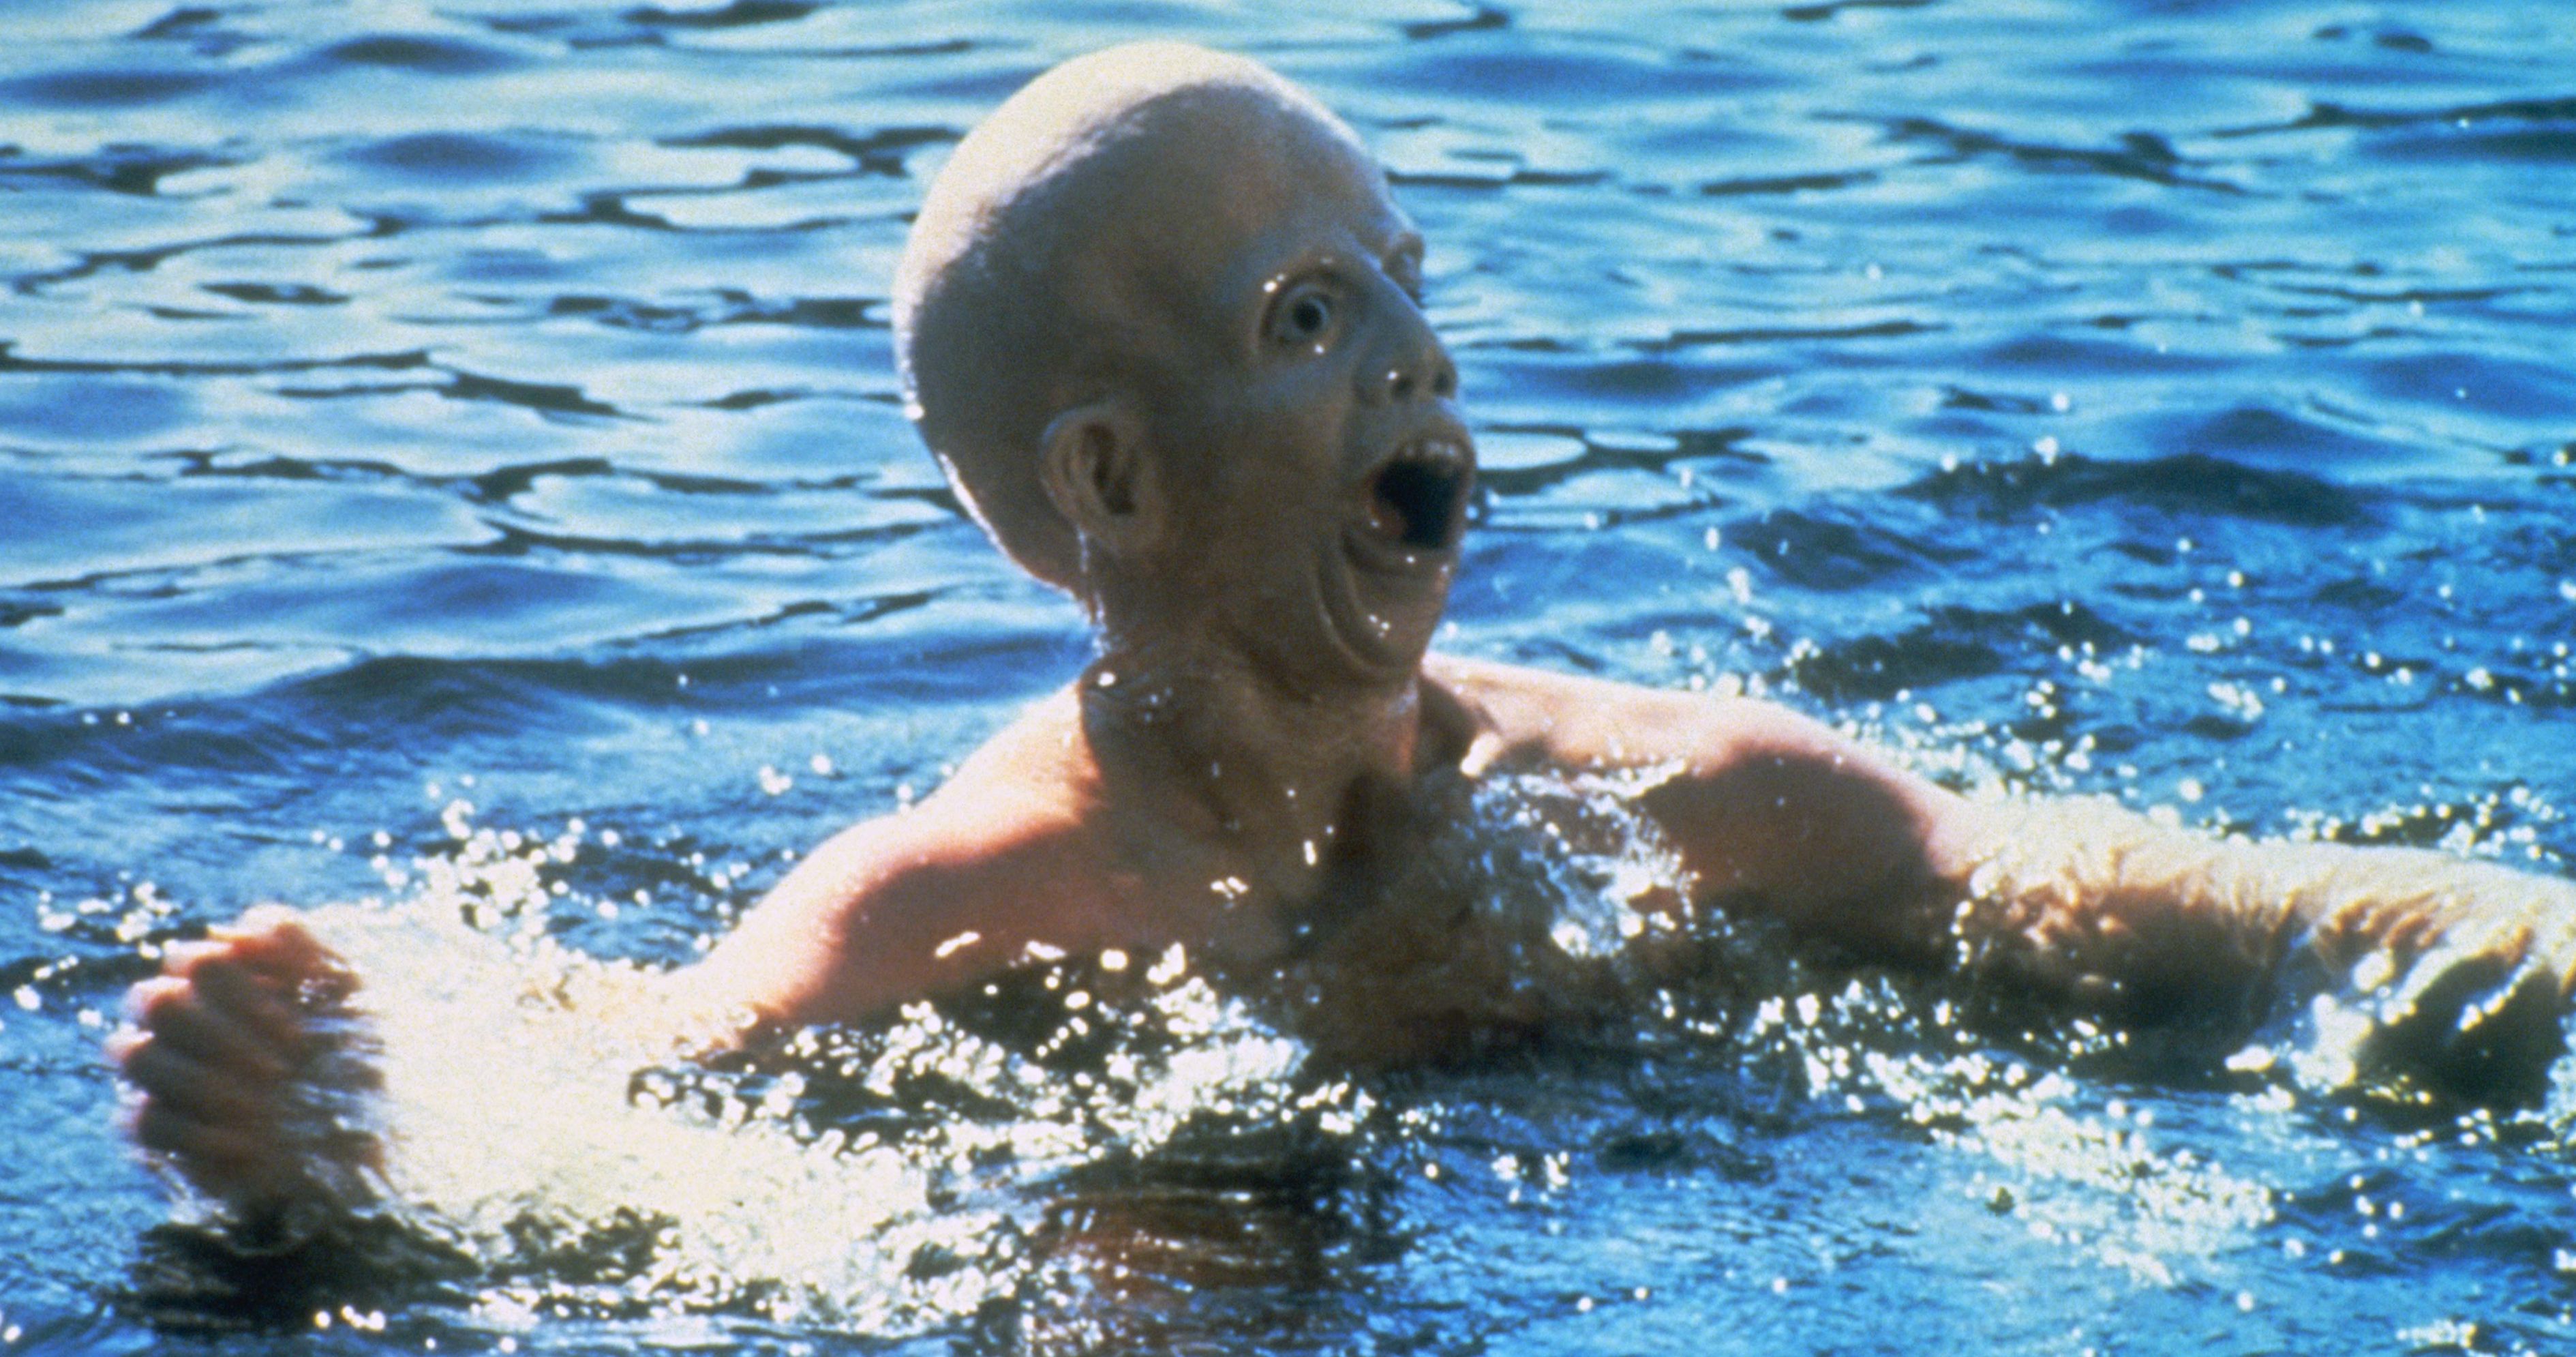 Friday the 13th Returns to Theaters for 40th Anniversary This October